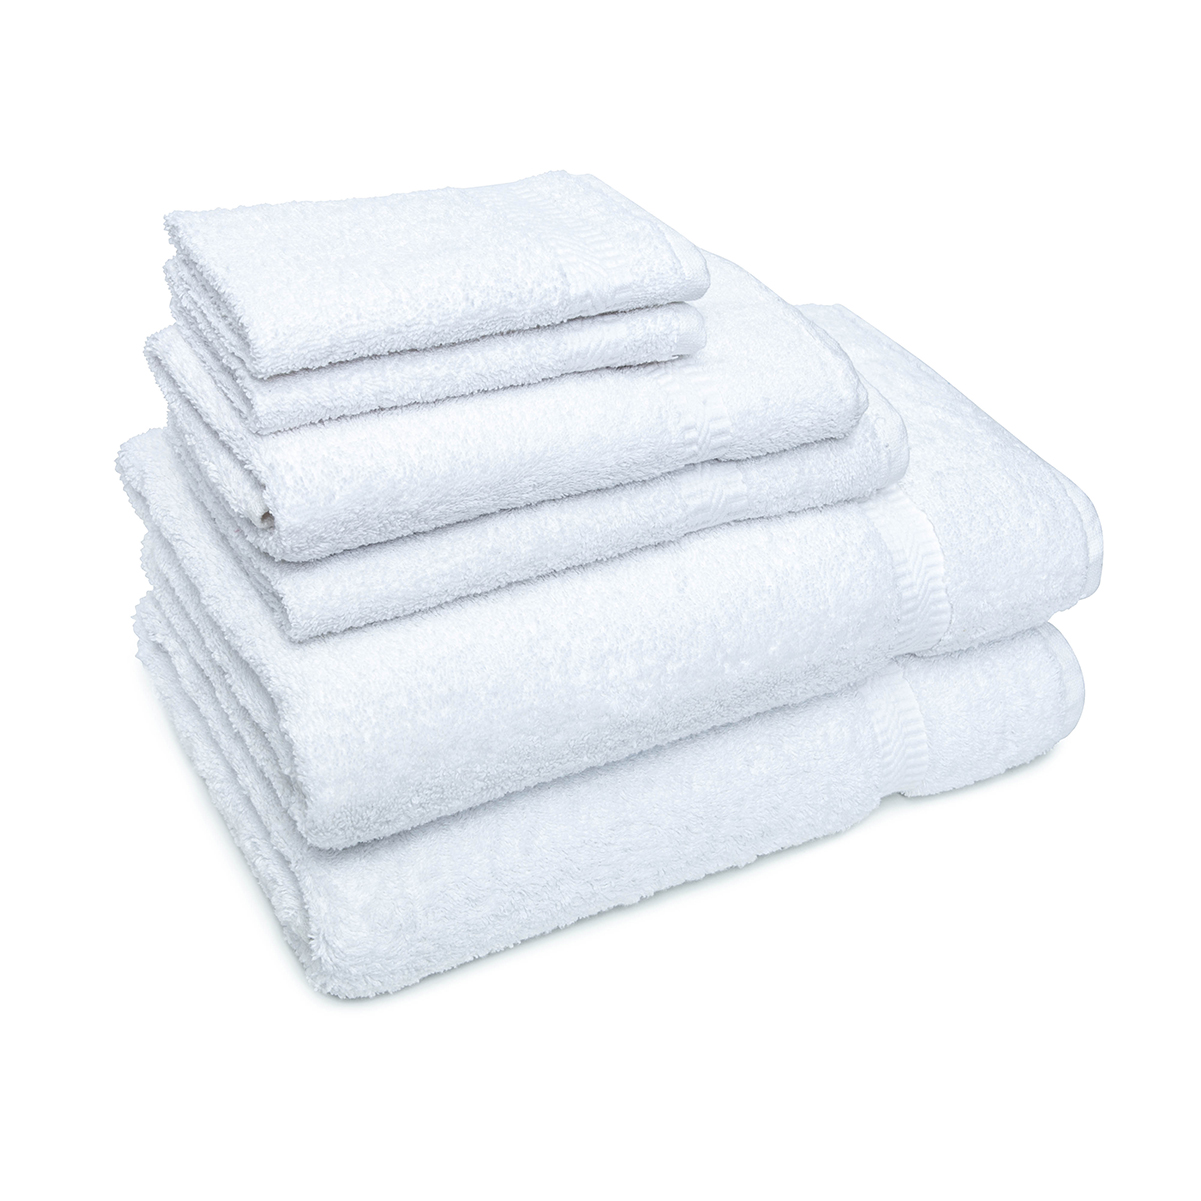 How can the true texture and softness of ADI towels, specifically the Plush Hotel ones, be experienced?